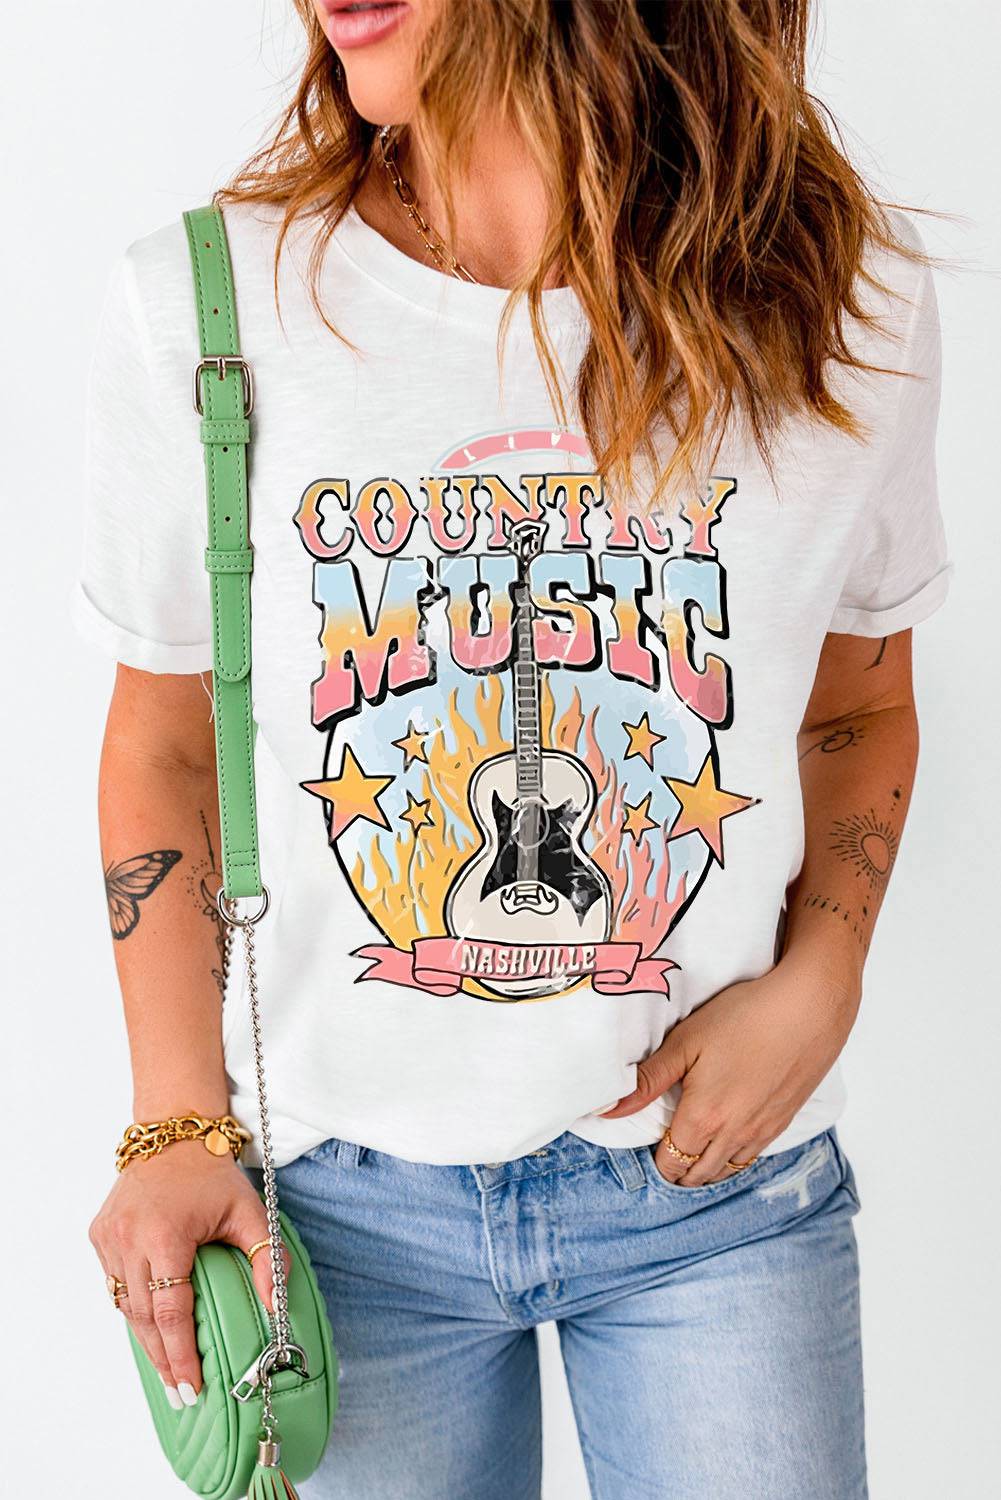 Country Music Nashville Graphic Tee Shirt - Let the Sweet Melodies of Country Romance You - Feel Ultimate Comfort and Style. - Guy Christopher